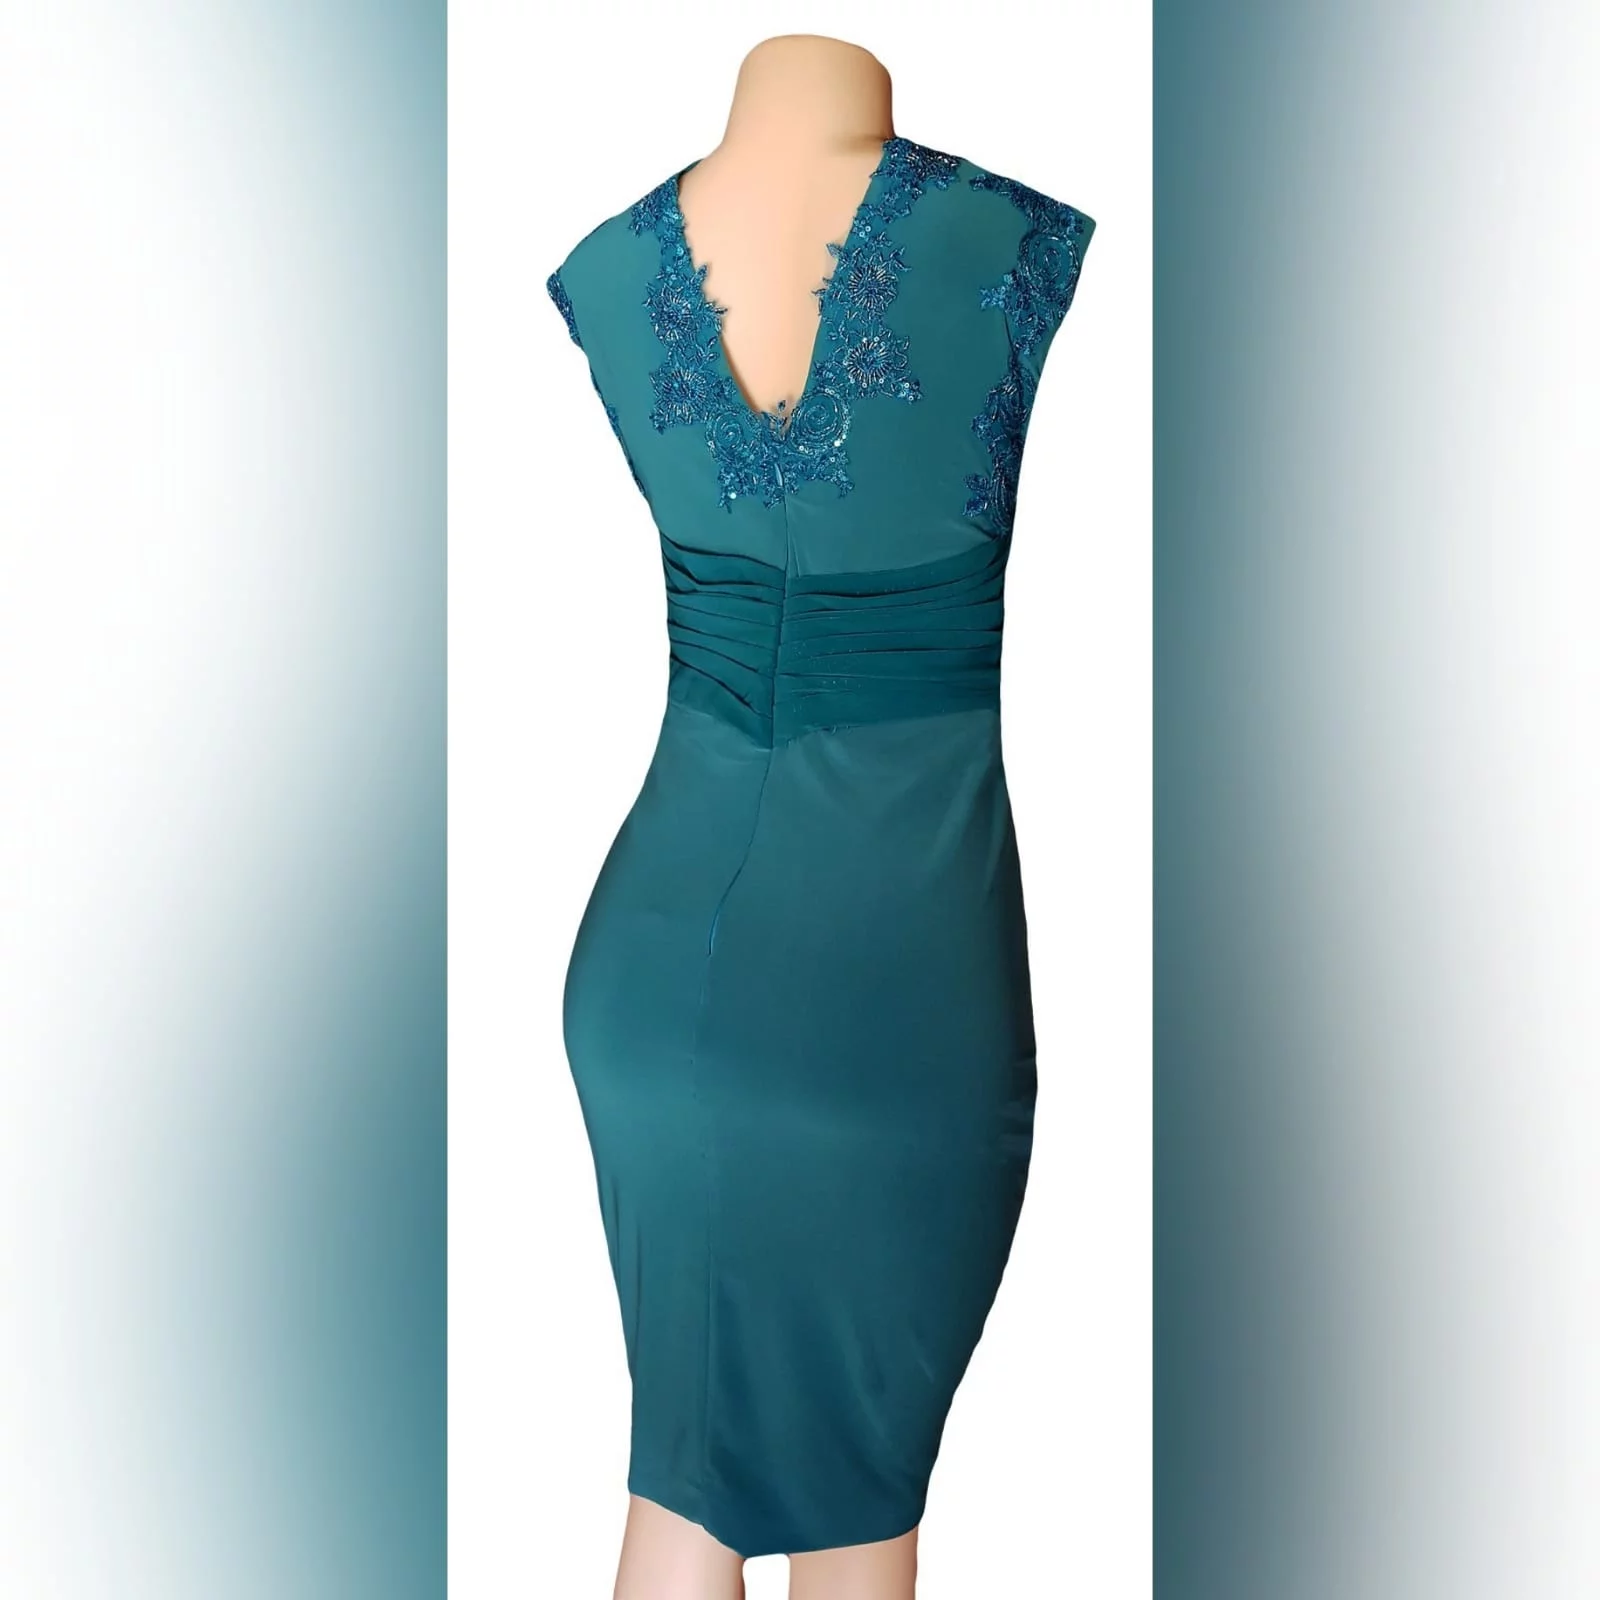 Pencil fit turquoise knee length formal dress 8 a pencil fit turquoise knee length formal dress, created for a wedding for mother of bride. This simple elegant design has a crossed v neckline detailed with beaded lace. A ruched belt with ends on the side over the dress.